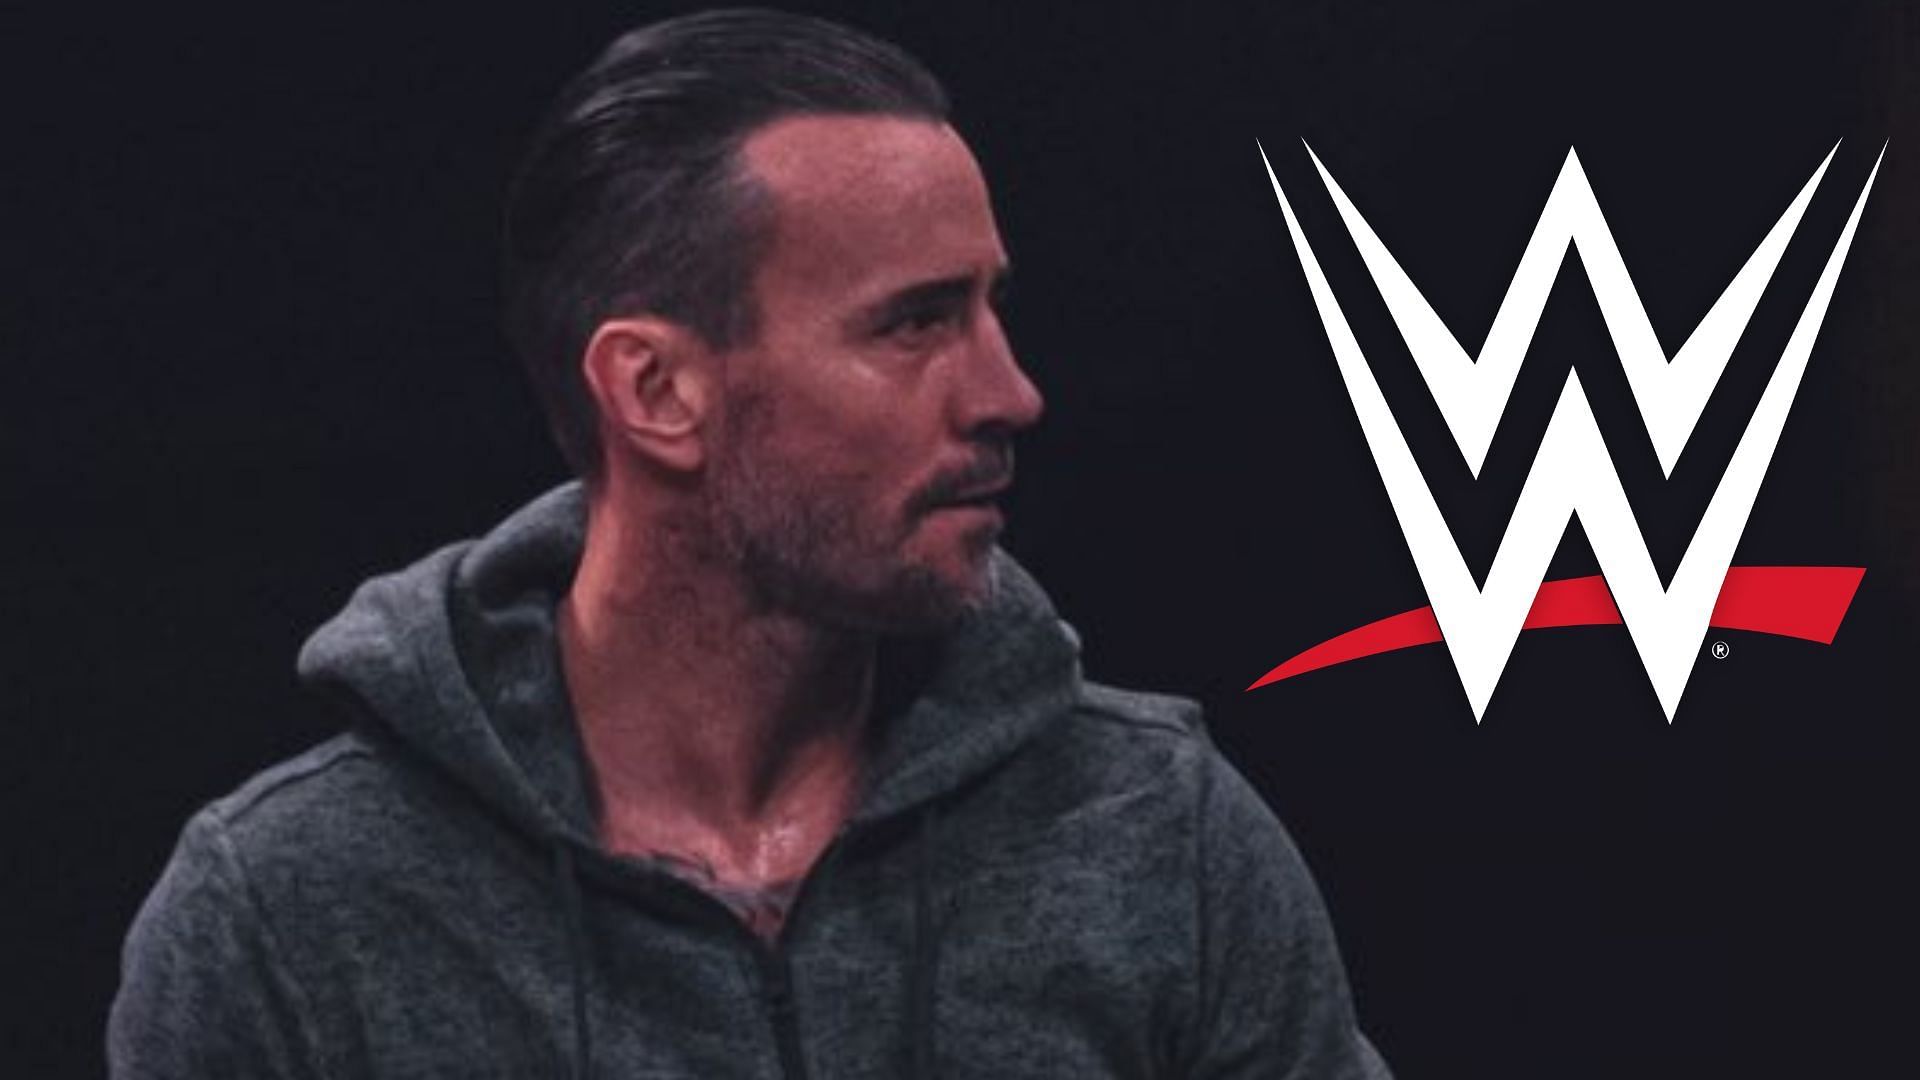 A former WWE superstar has posted an old picture with CM Punk